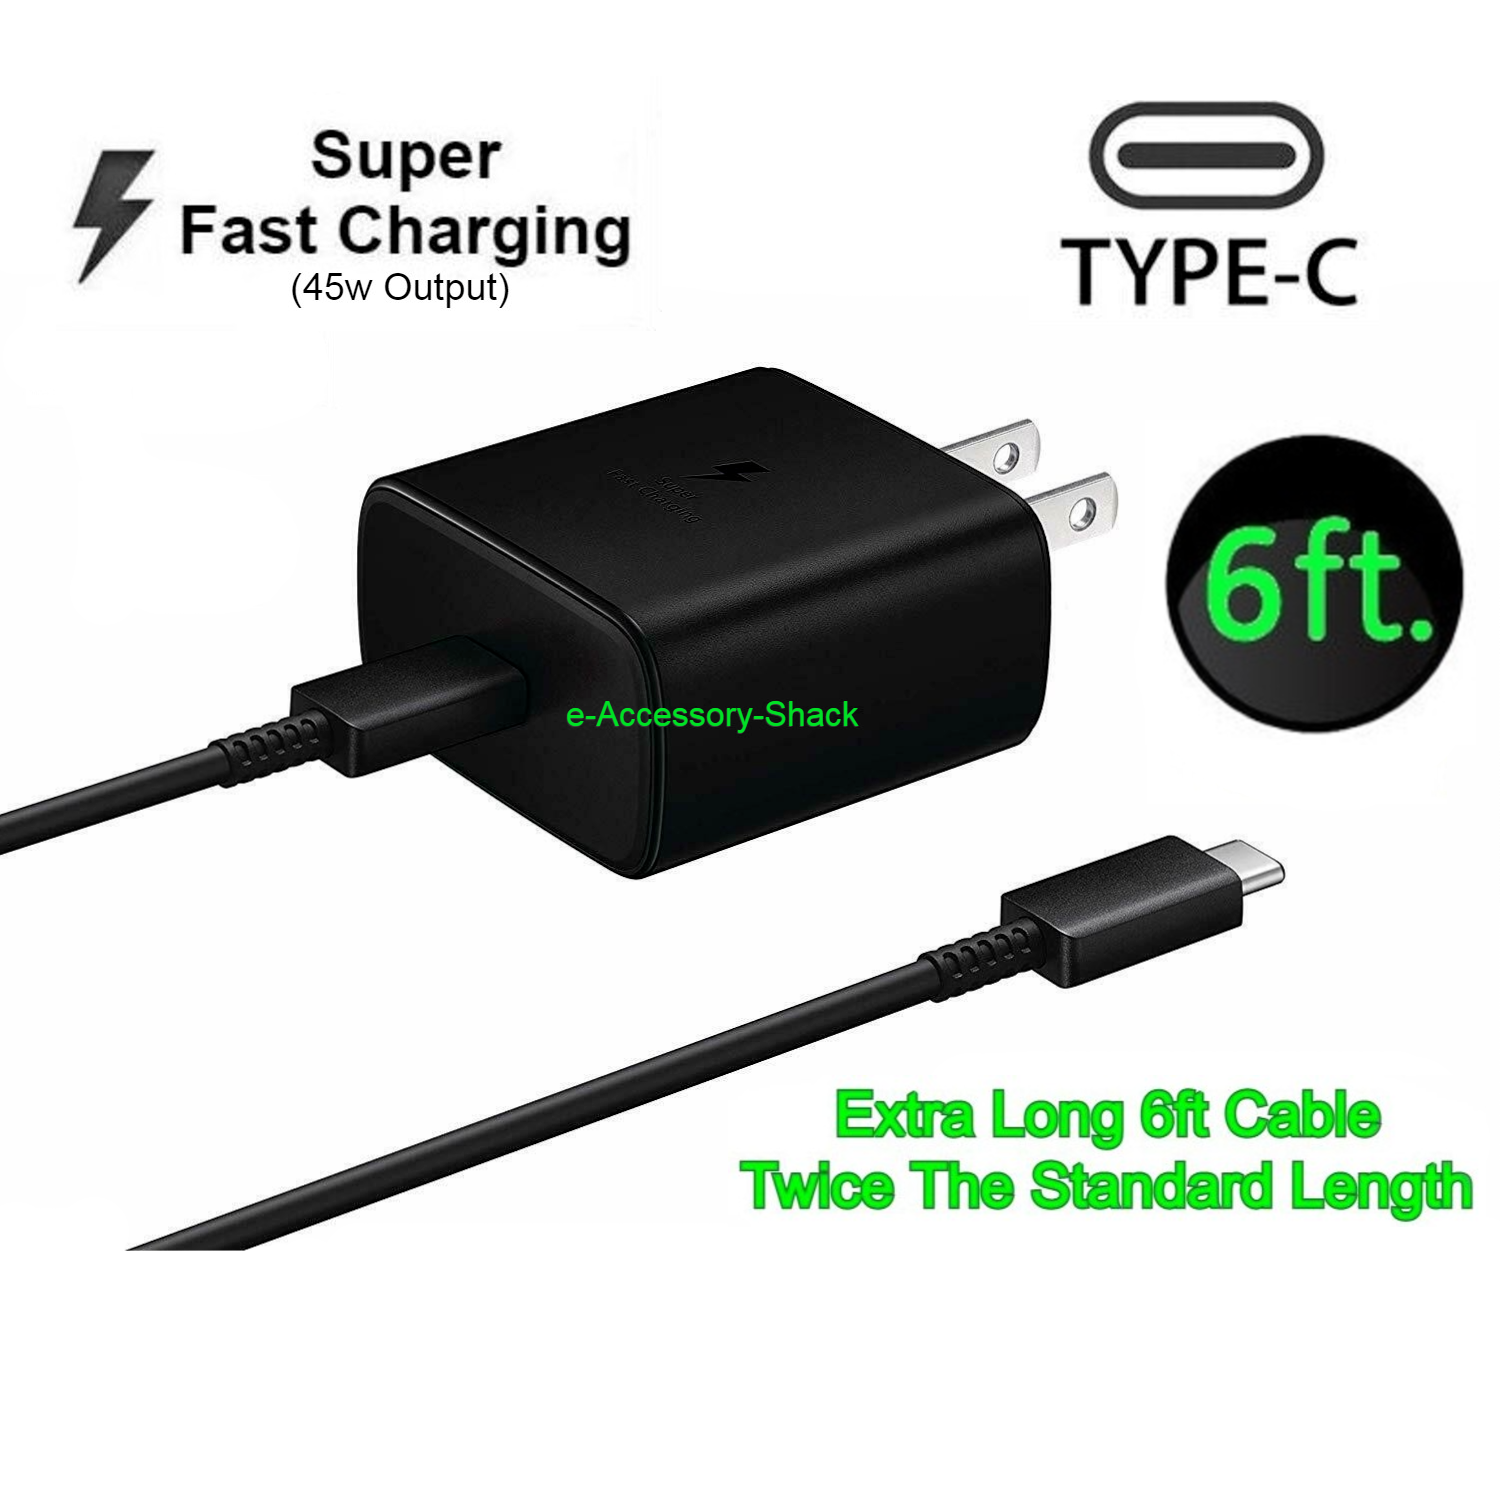 45w USB-C Super Fast Wall Charger+6ft Cable For Samsung Galaxy Note 10+5G+Lite Compatible Brand: Universal, For Amazon